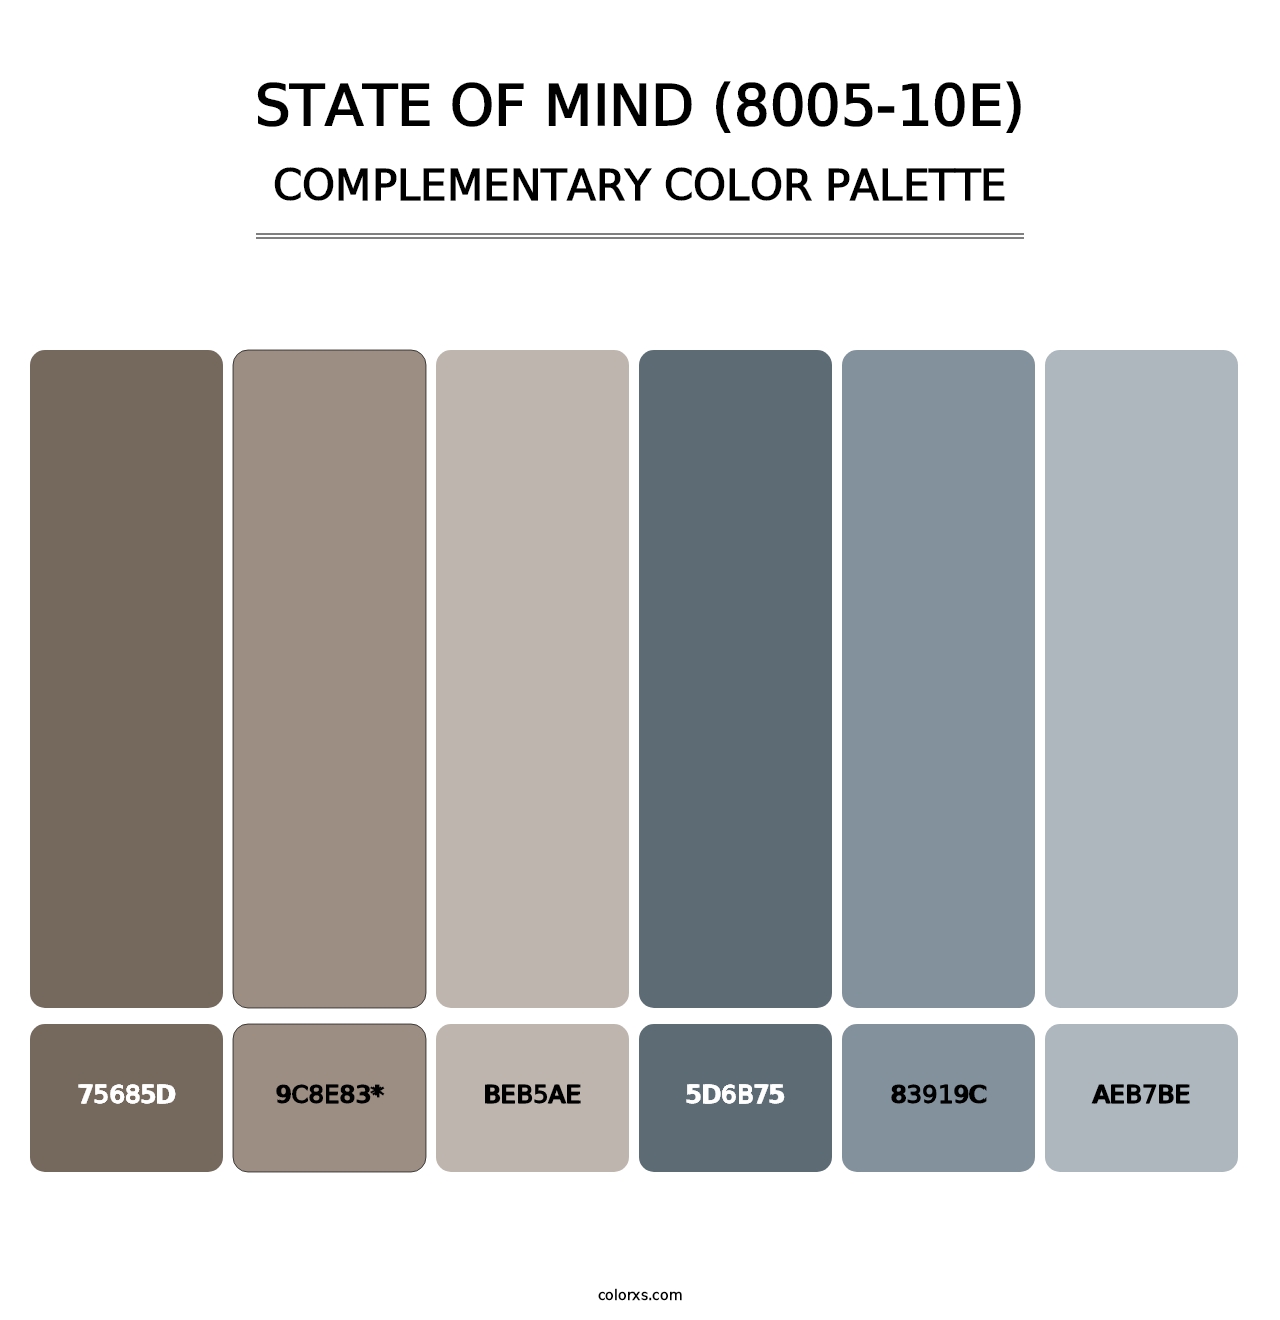 State of Mind (8005-10E) - Complementary Color Palette